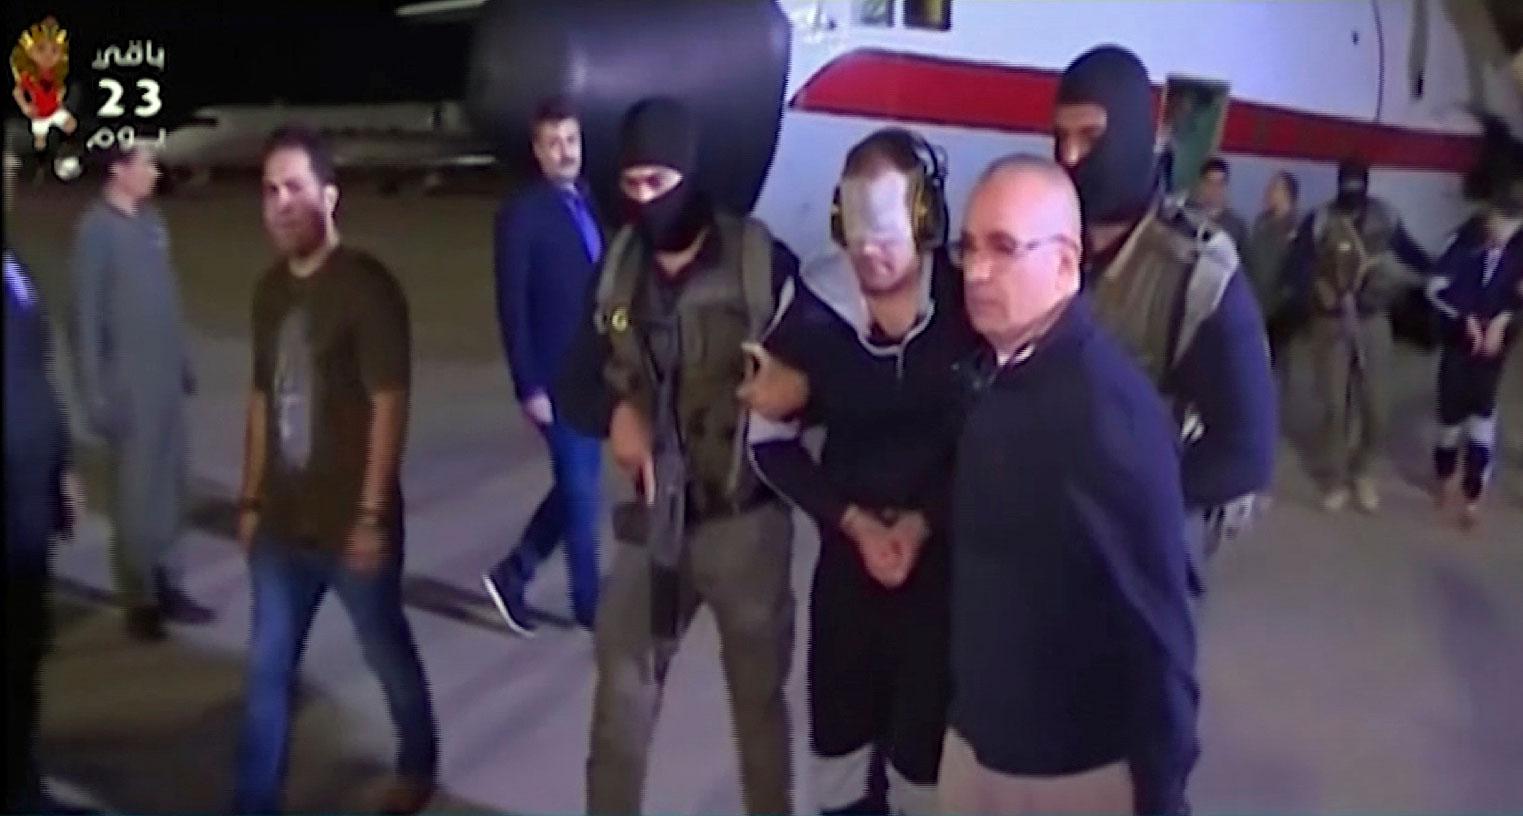 May 29, 2019 photo shows a blindfolded Hisham al-Ashmawy escorted by Egyptian military officers